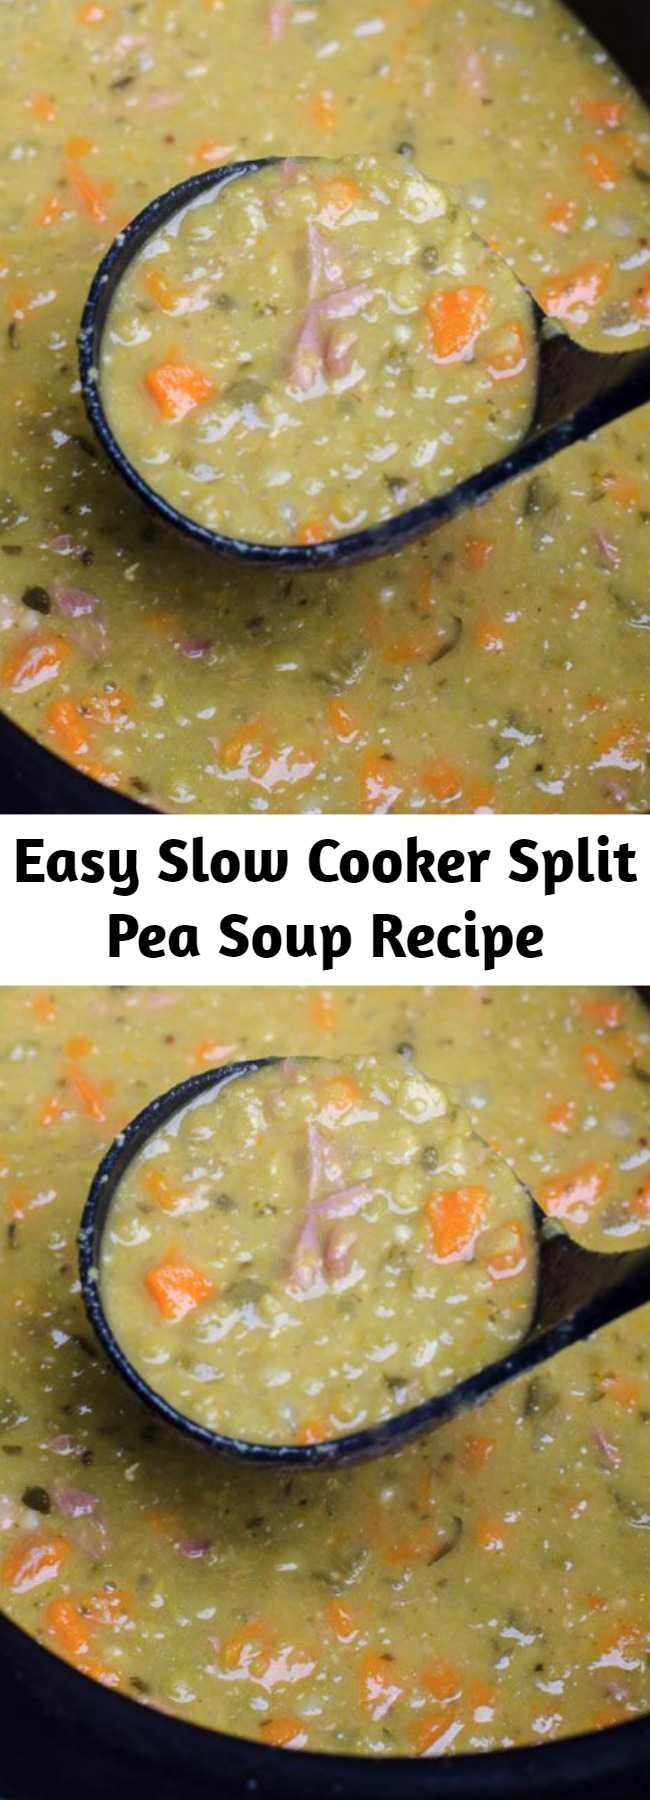 Easy Slow Cooker Split Pea Soup Recipe - Slow Cooker Split Pea Soup is a great way to make use of that leftover bone from your holiday ham. Cooking it low and slow is the best method for creating creamy, delicious split pea soup.